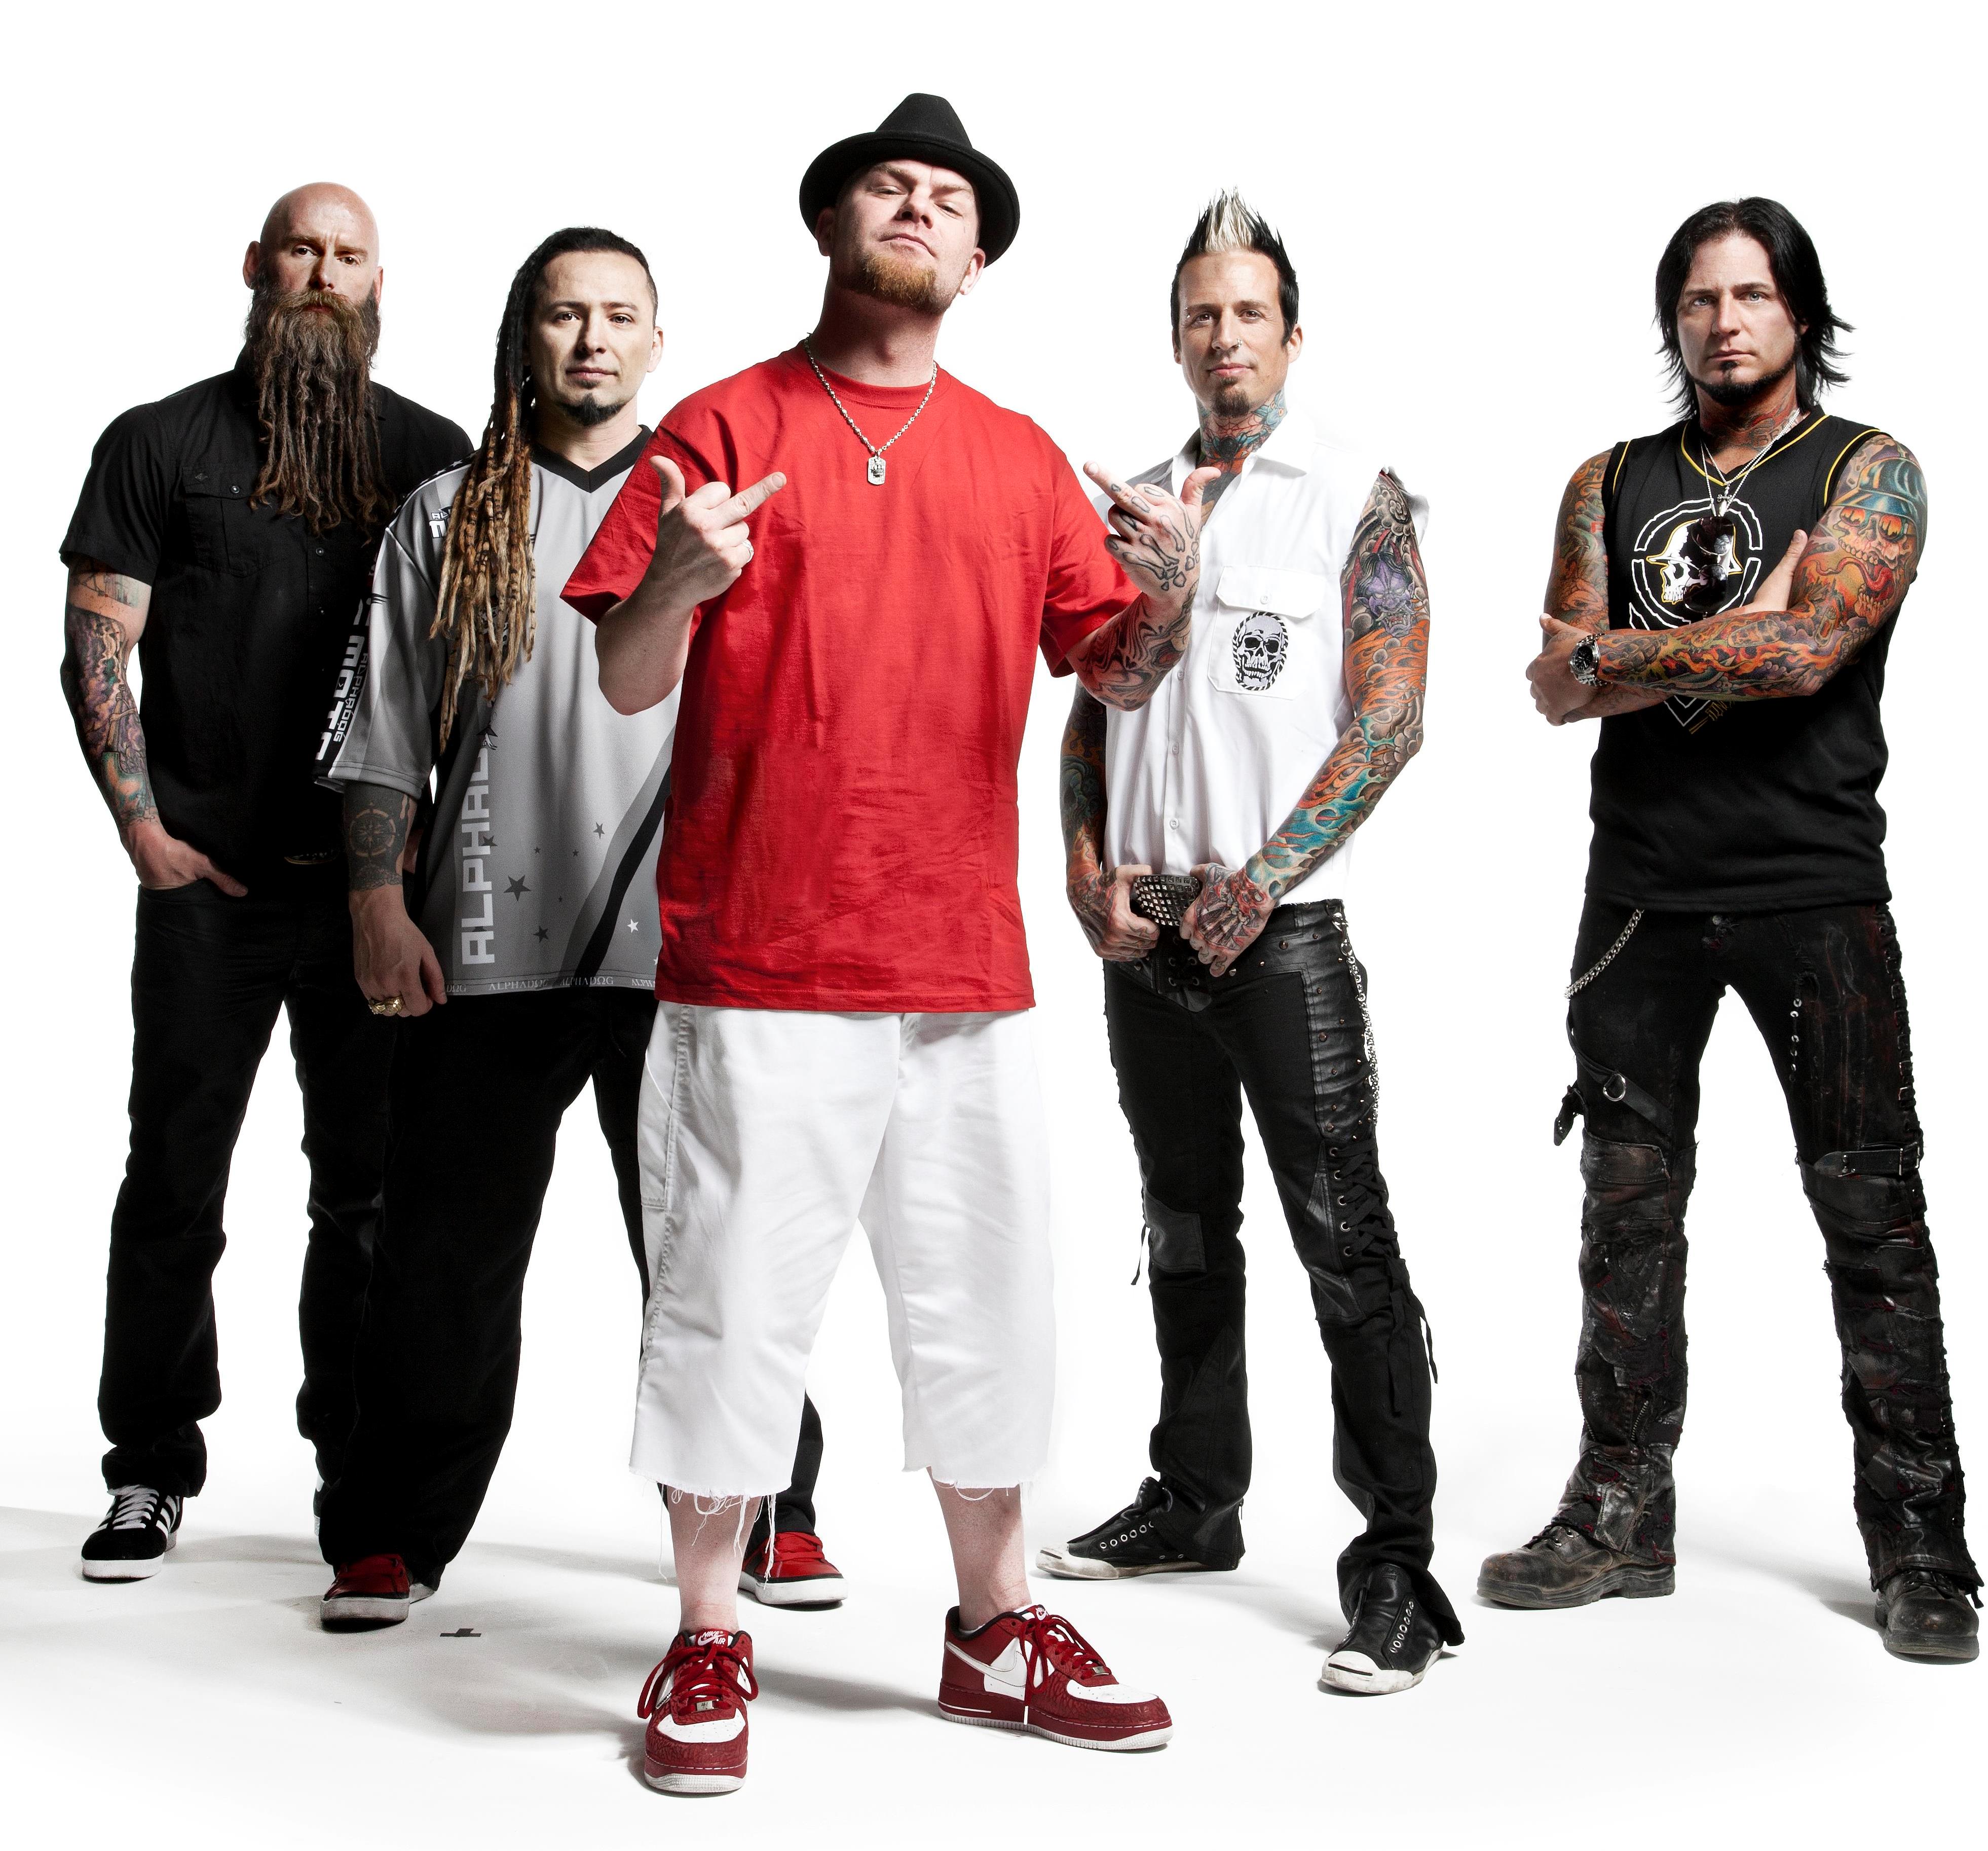 popular songs by five finger death punch